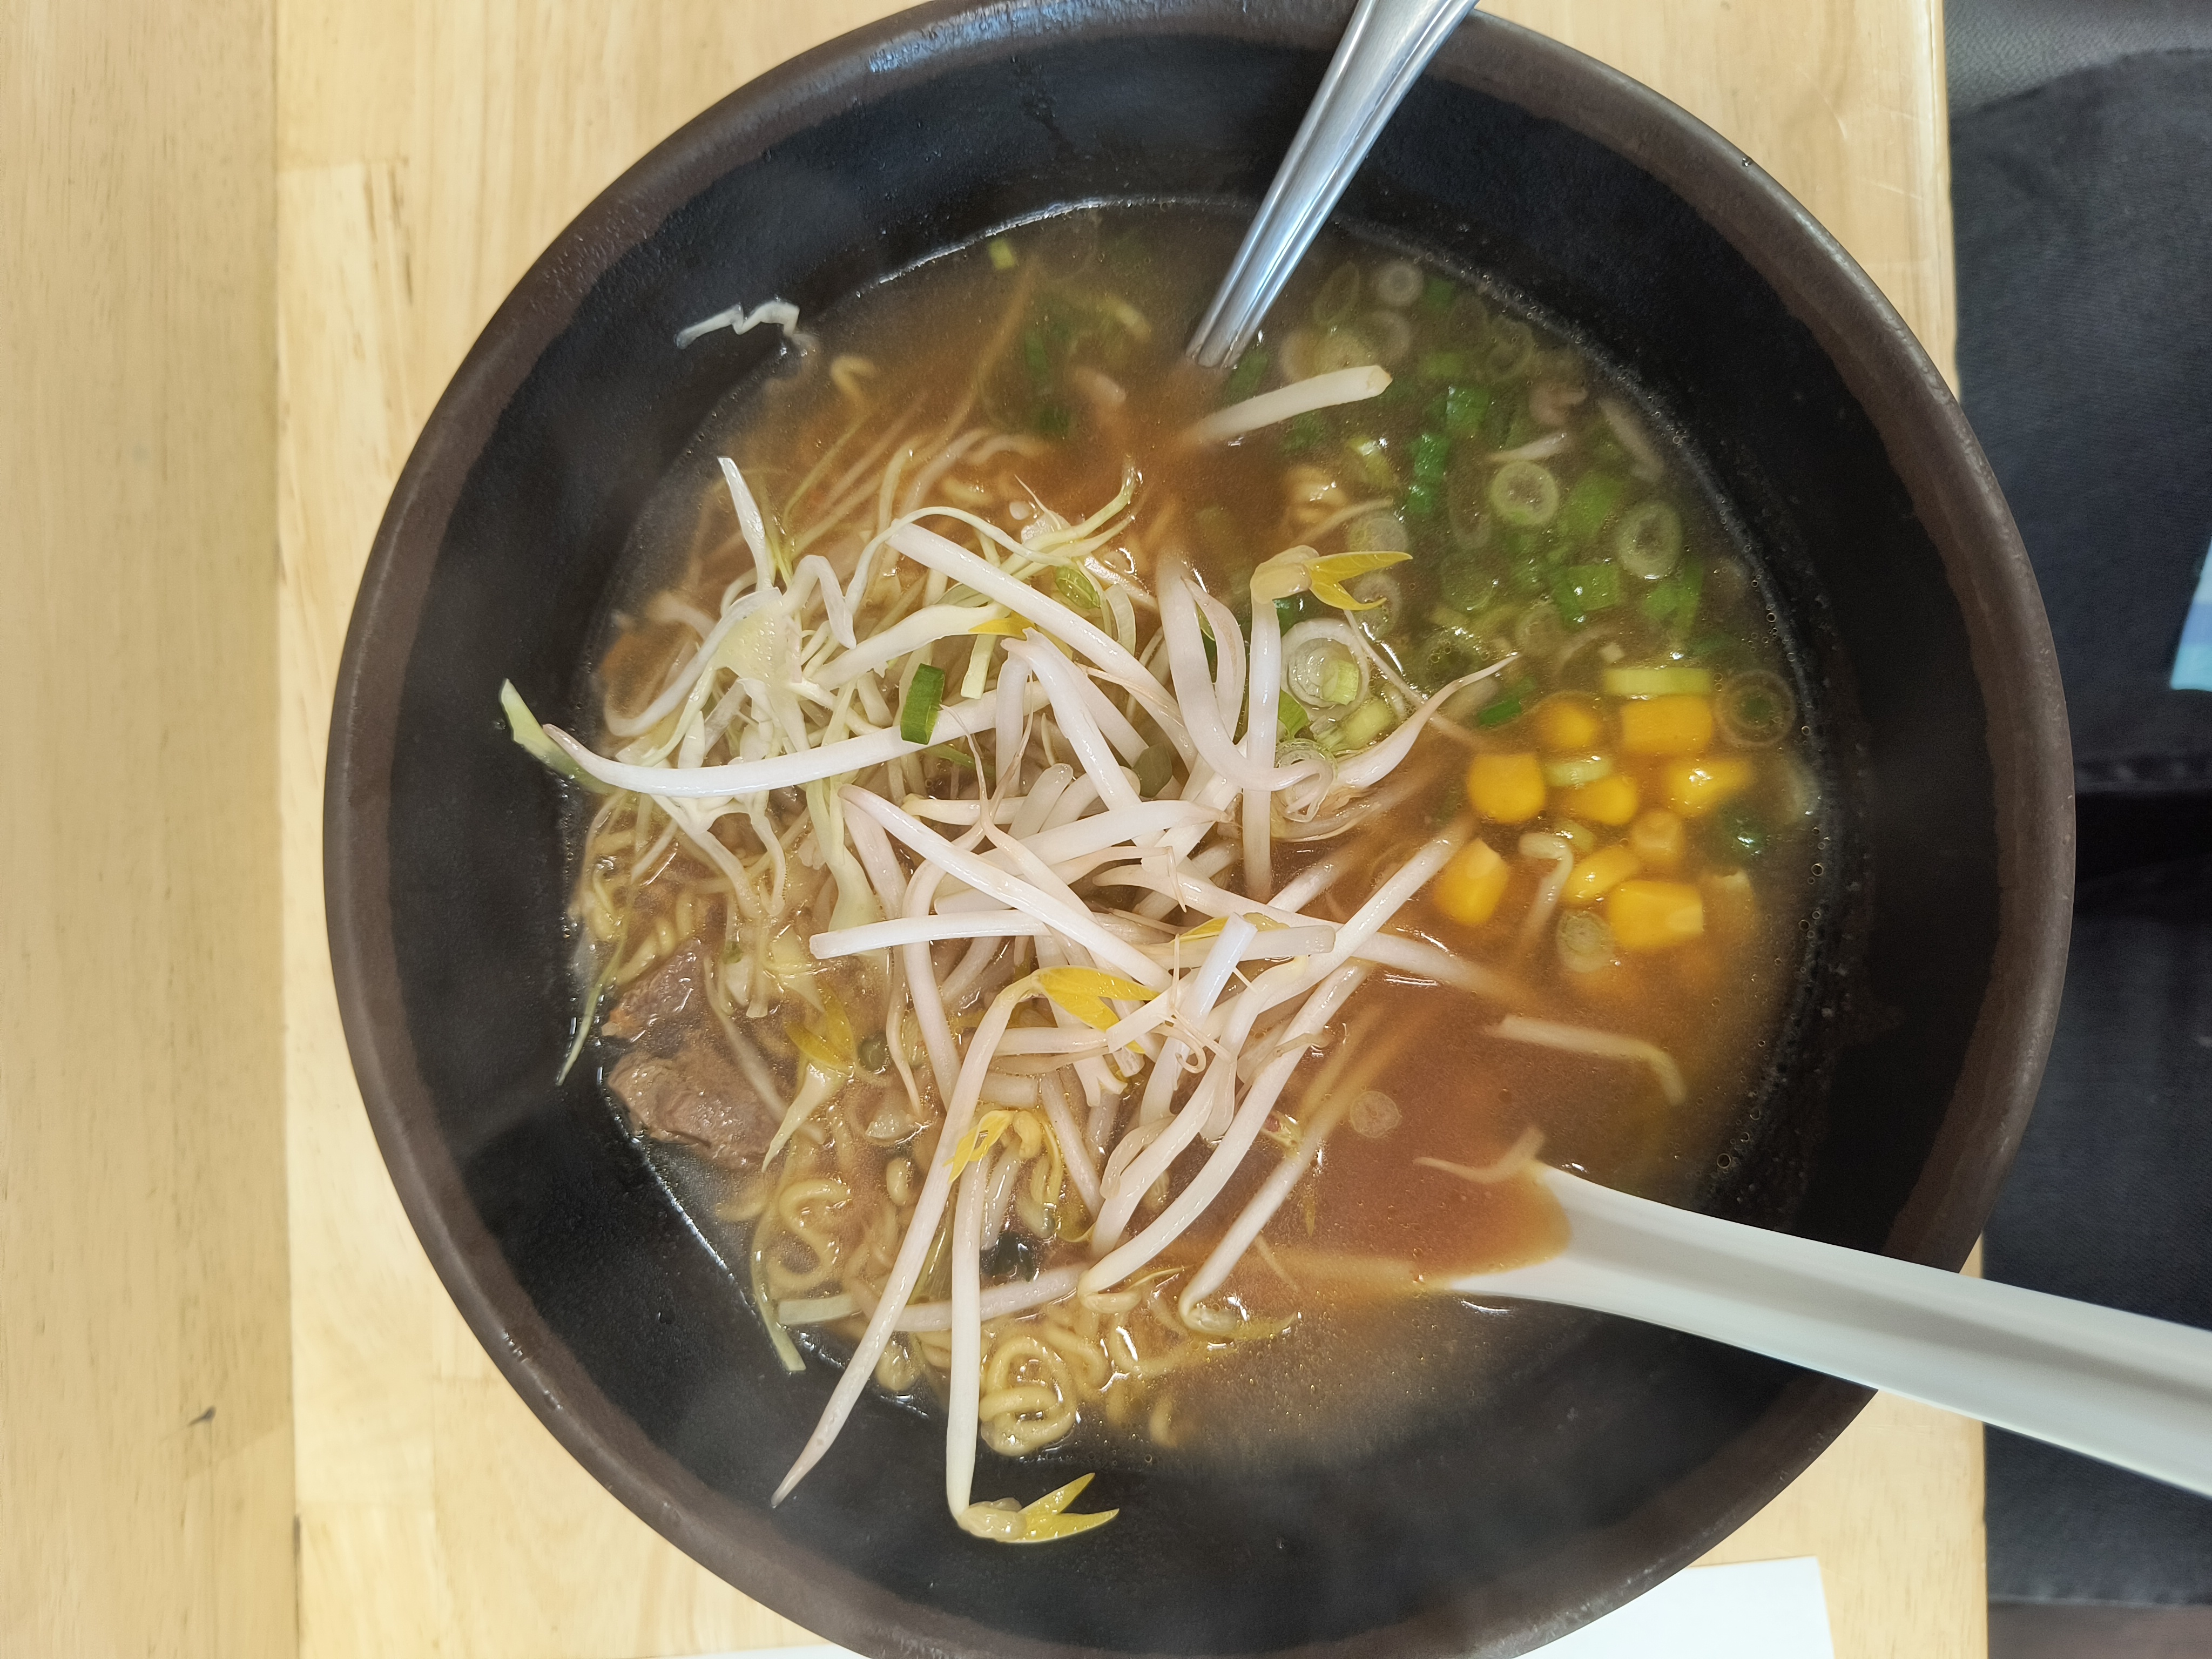 Camera sample of a bowl of soup from the Motorola Edge (2022).